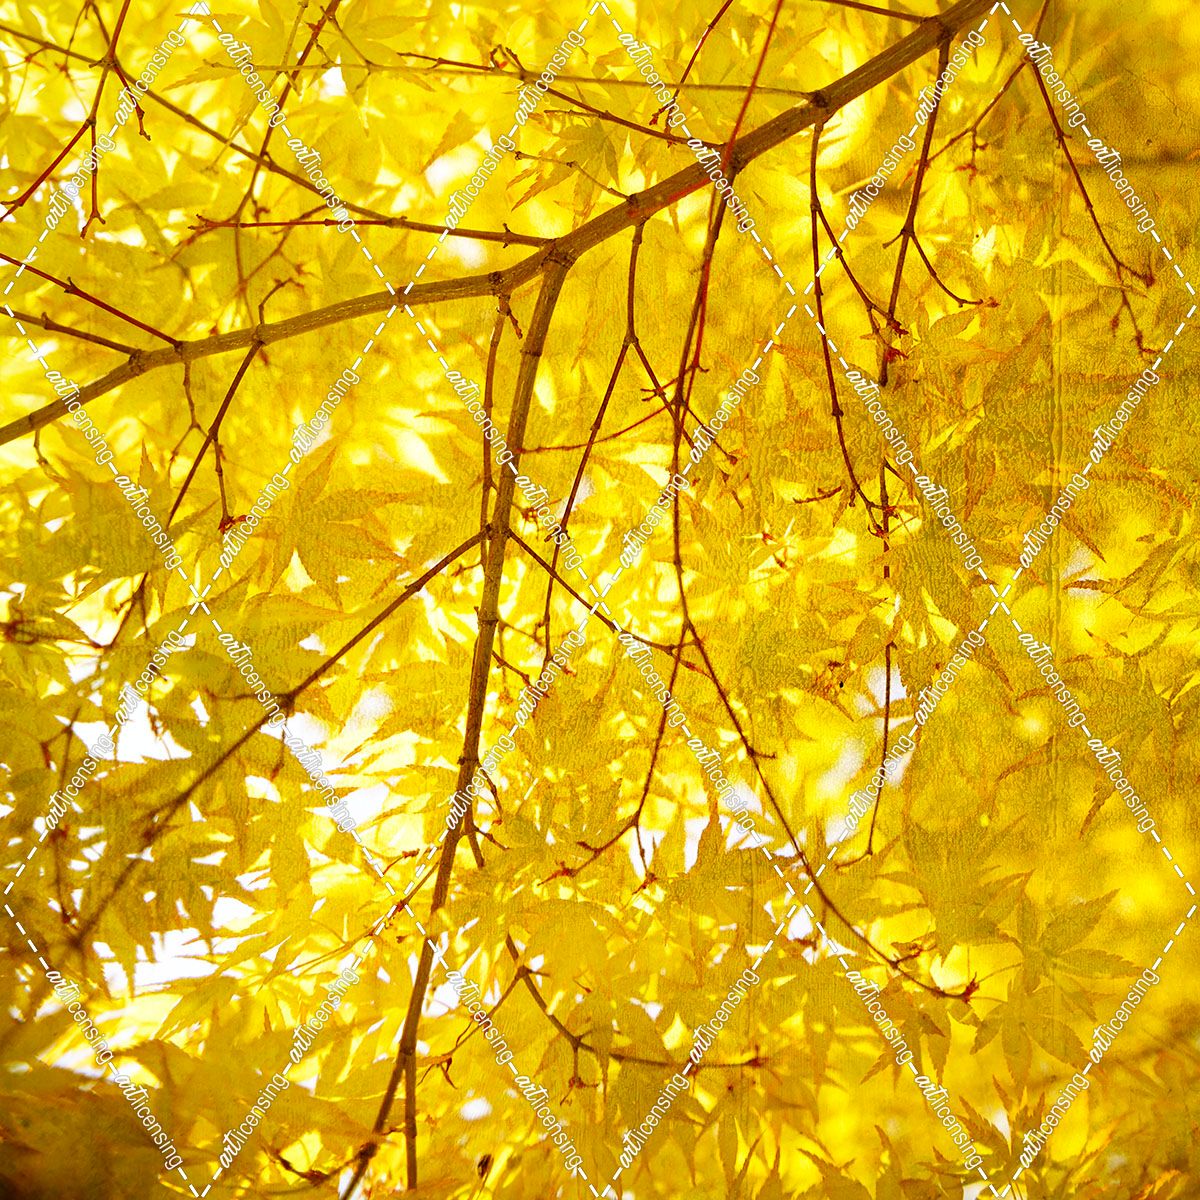 Yellow Fall Leaves 007